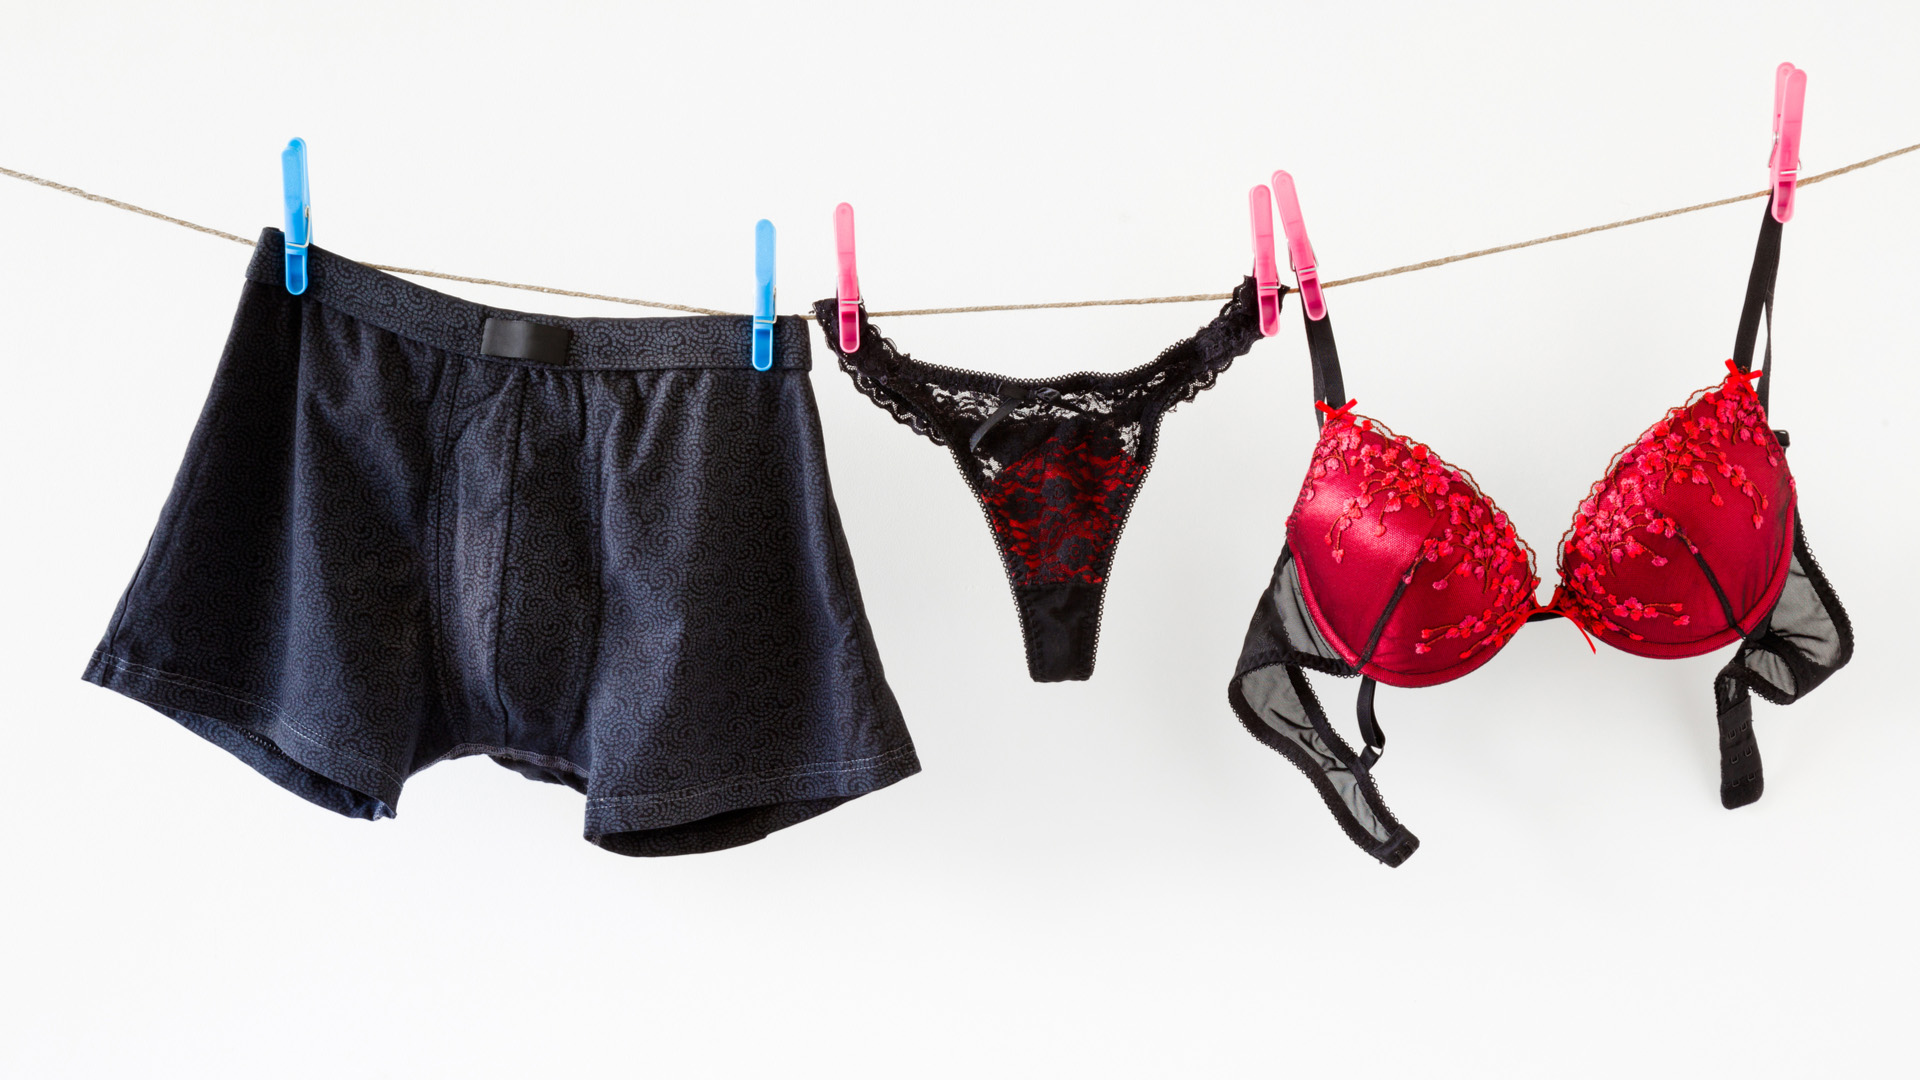 Navy boxer briefs next to black and red panties and bra hanging on a string.